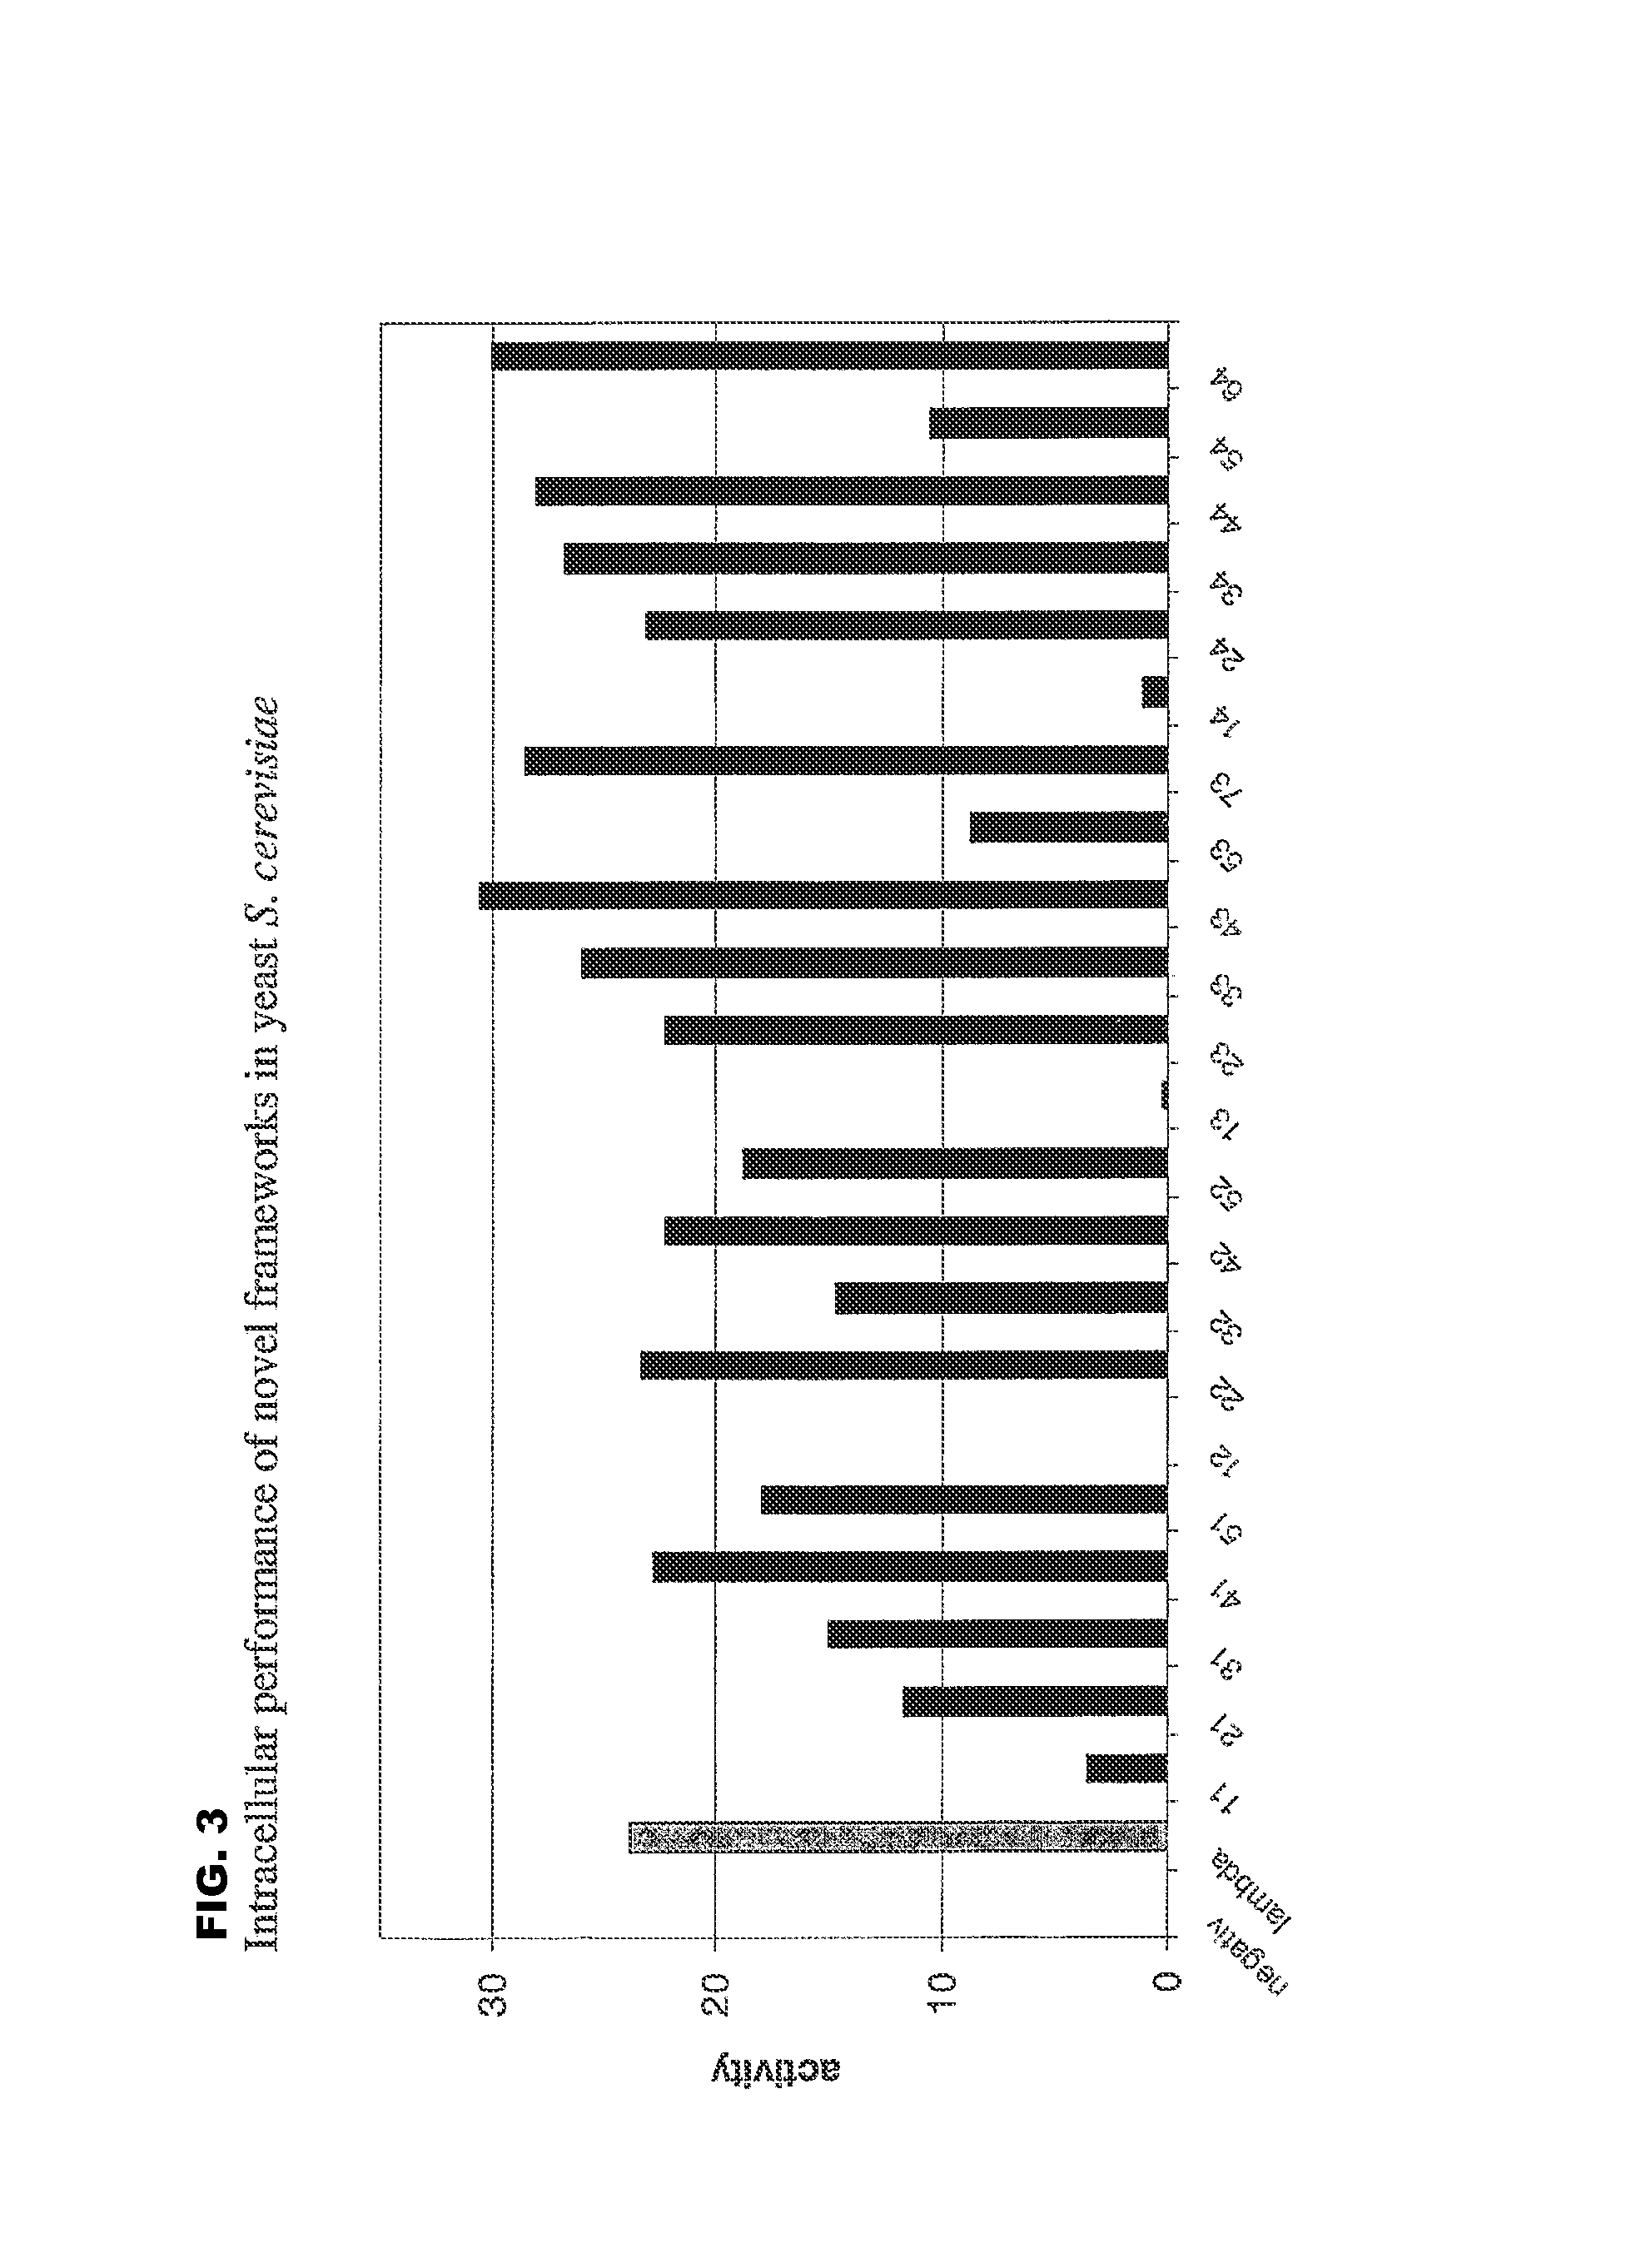 Immunoglobulin frameworks which demonstrate enhanced stability in the intracellular environment and methods of identifying same